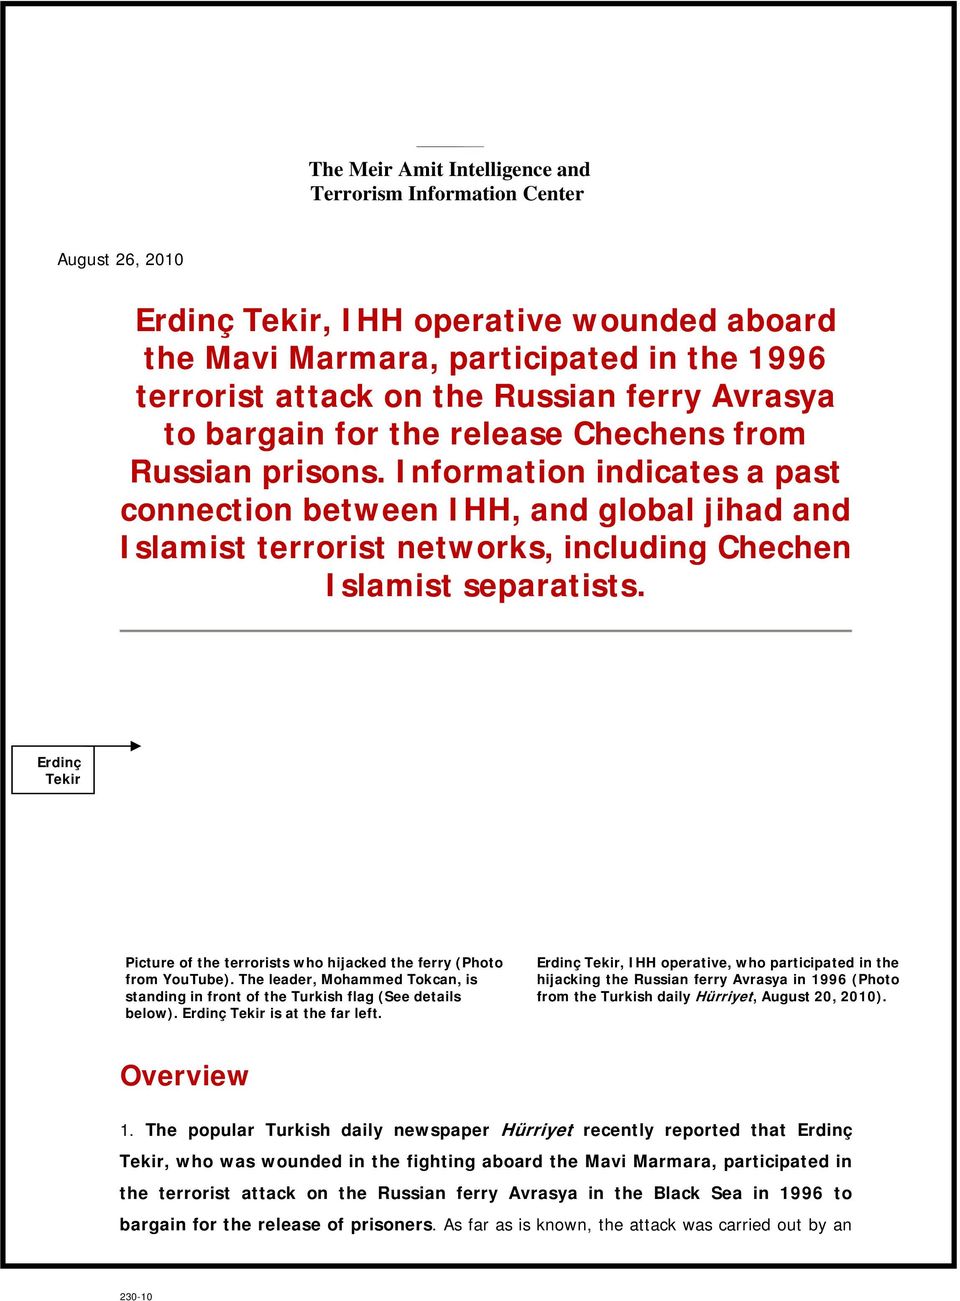 Information indicates a past connection between IHH, and global jihad and Islamist terrorist networks, including Chechen Islamist separatists.